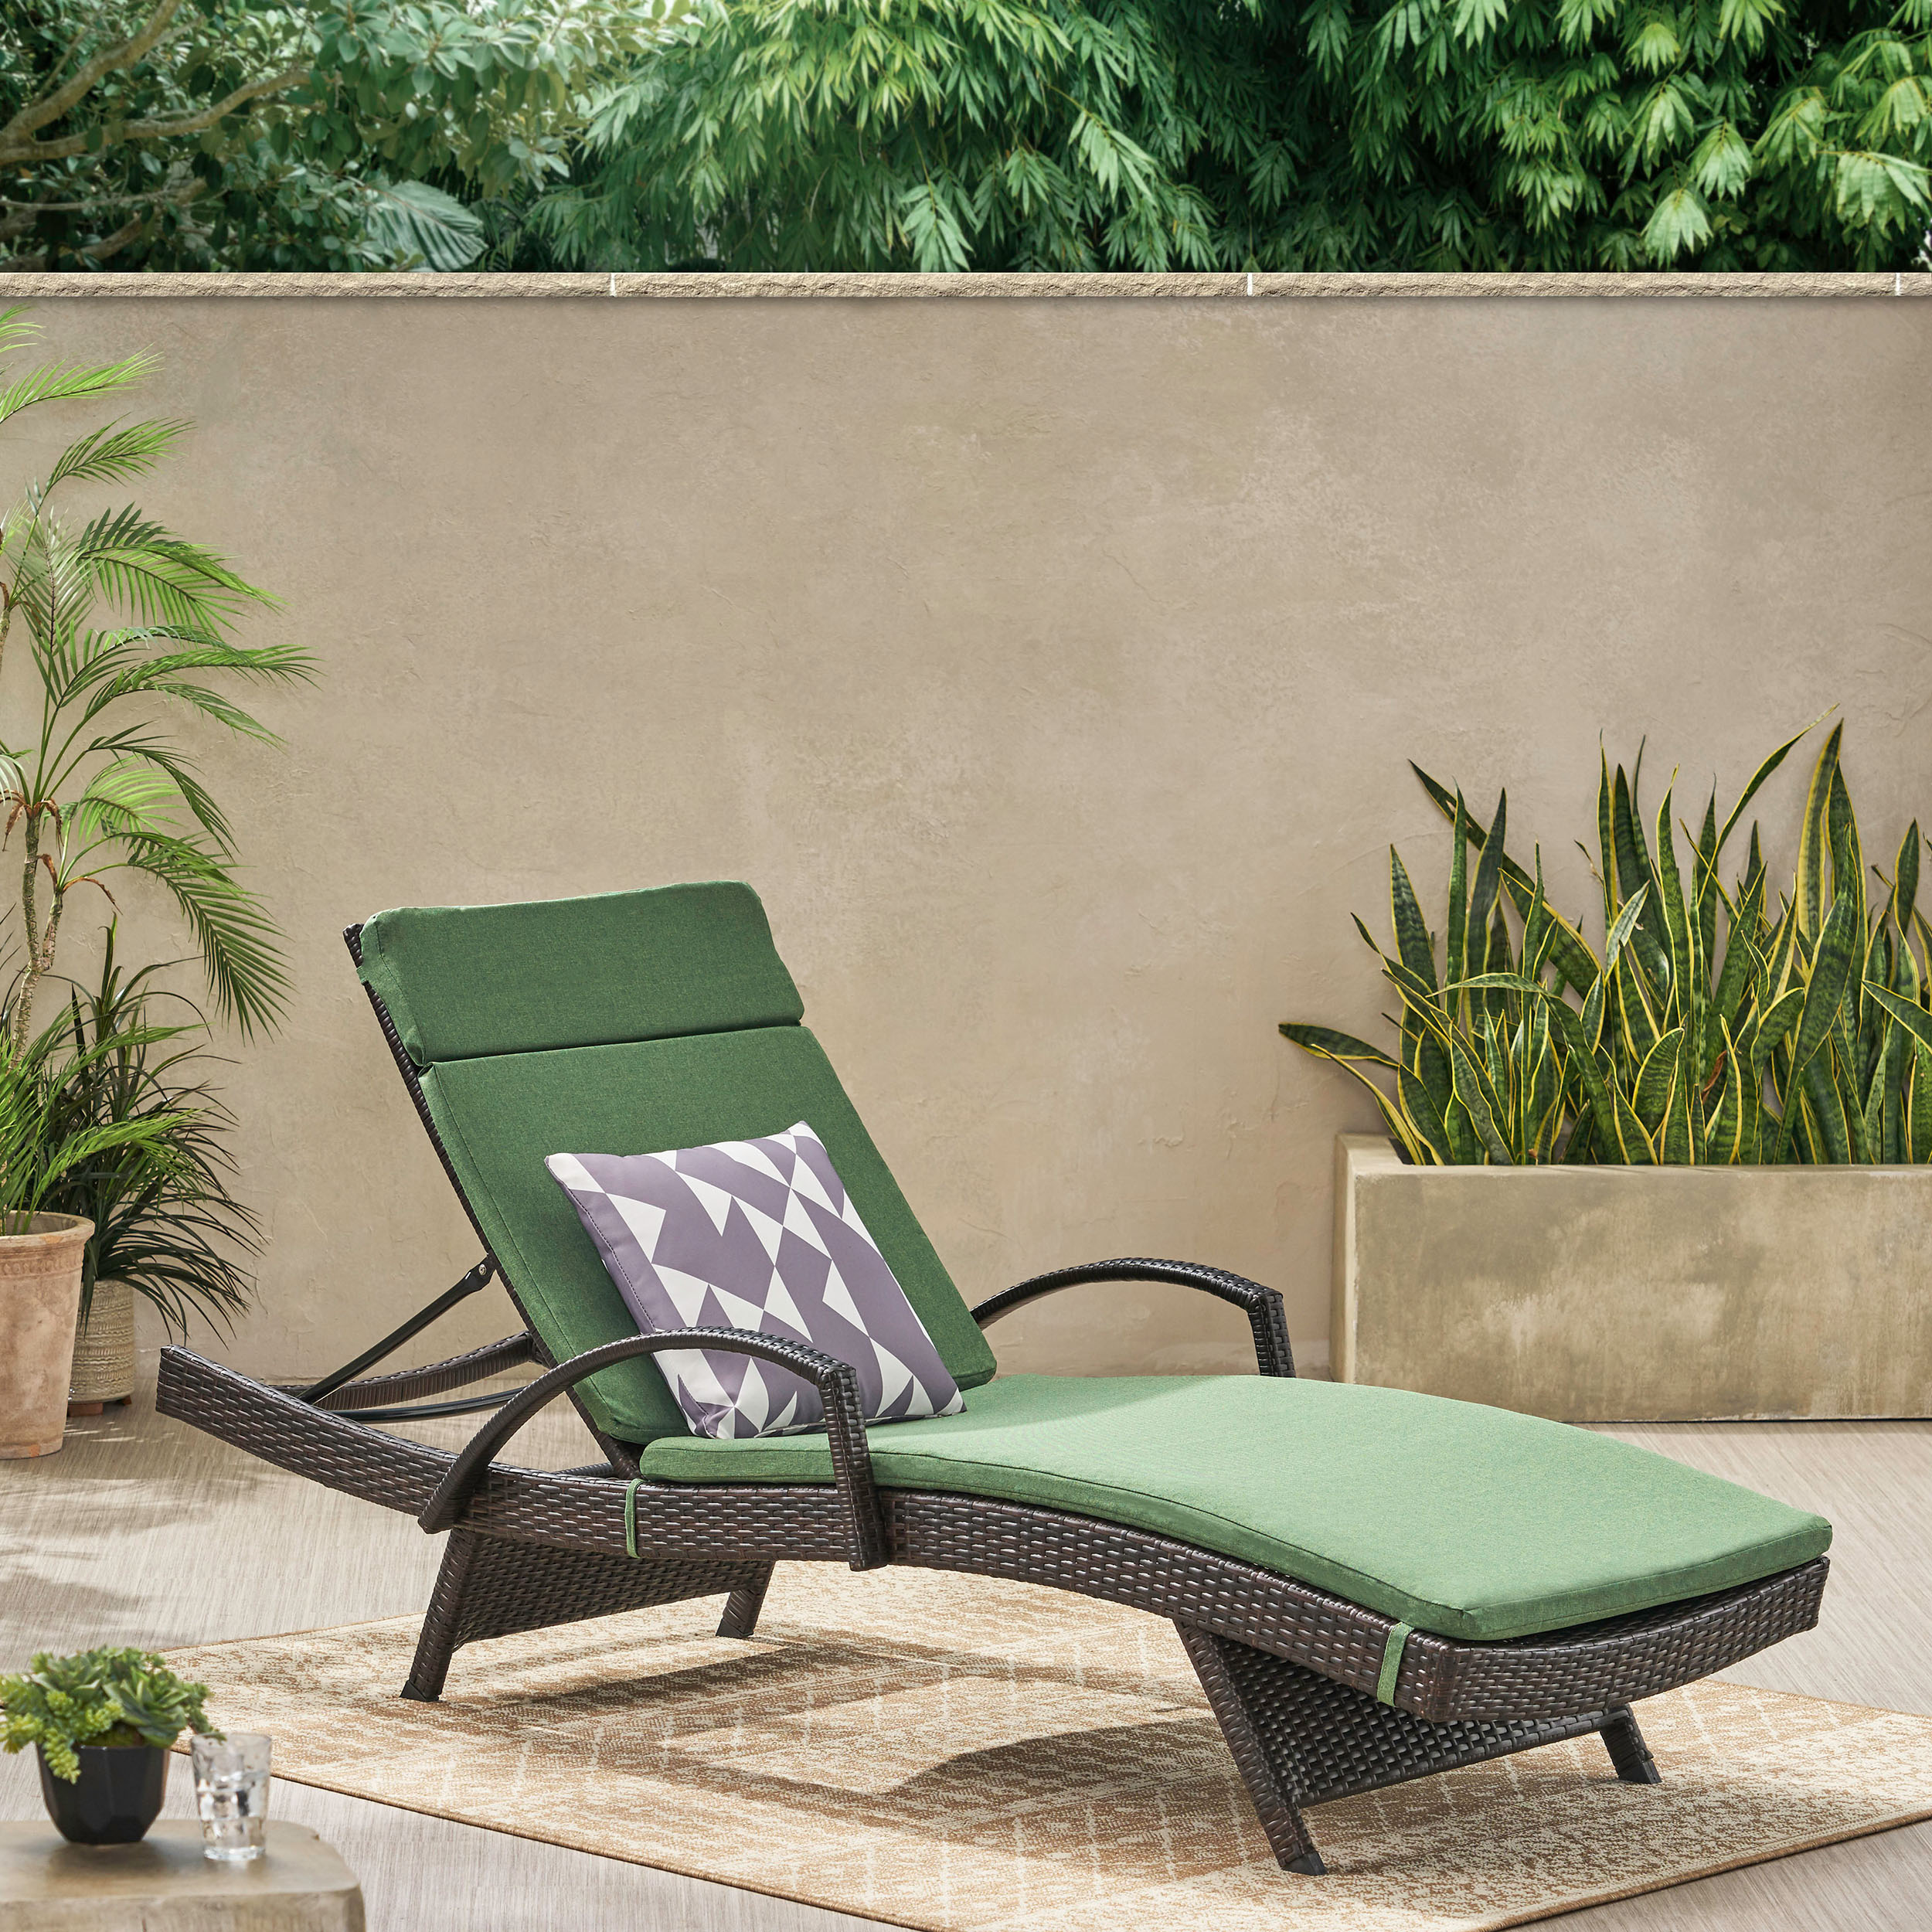 Stratford Outdoor Multi Brown Wicker Adjustable Chaise Lounge with Cushion - image 4 of 9